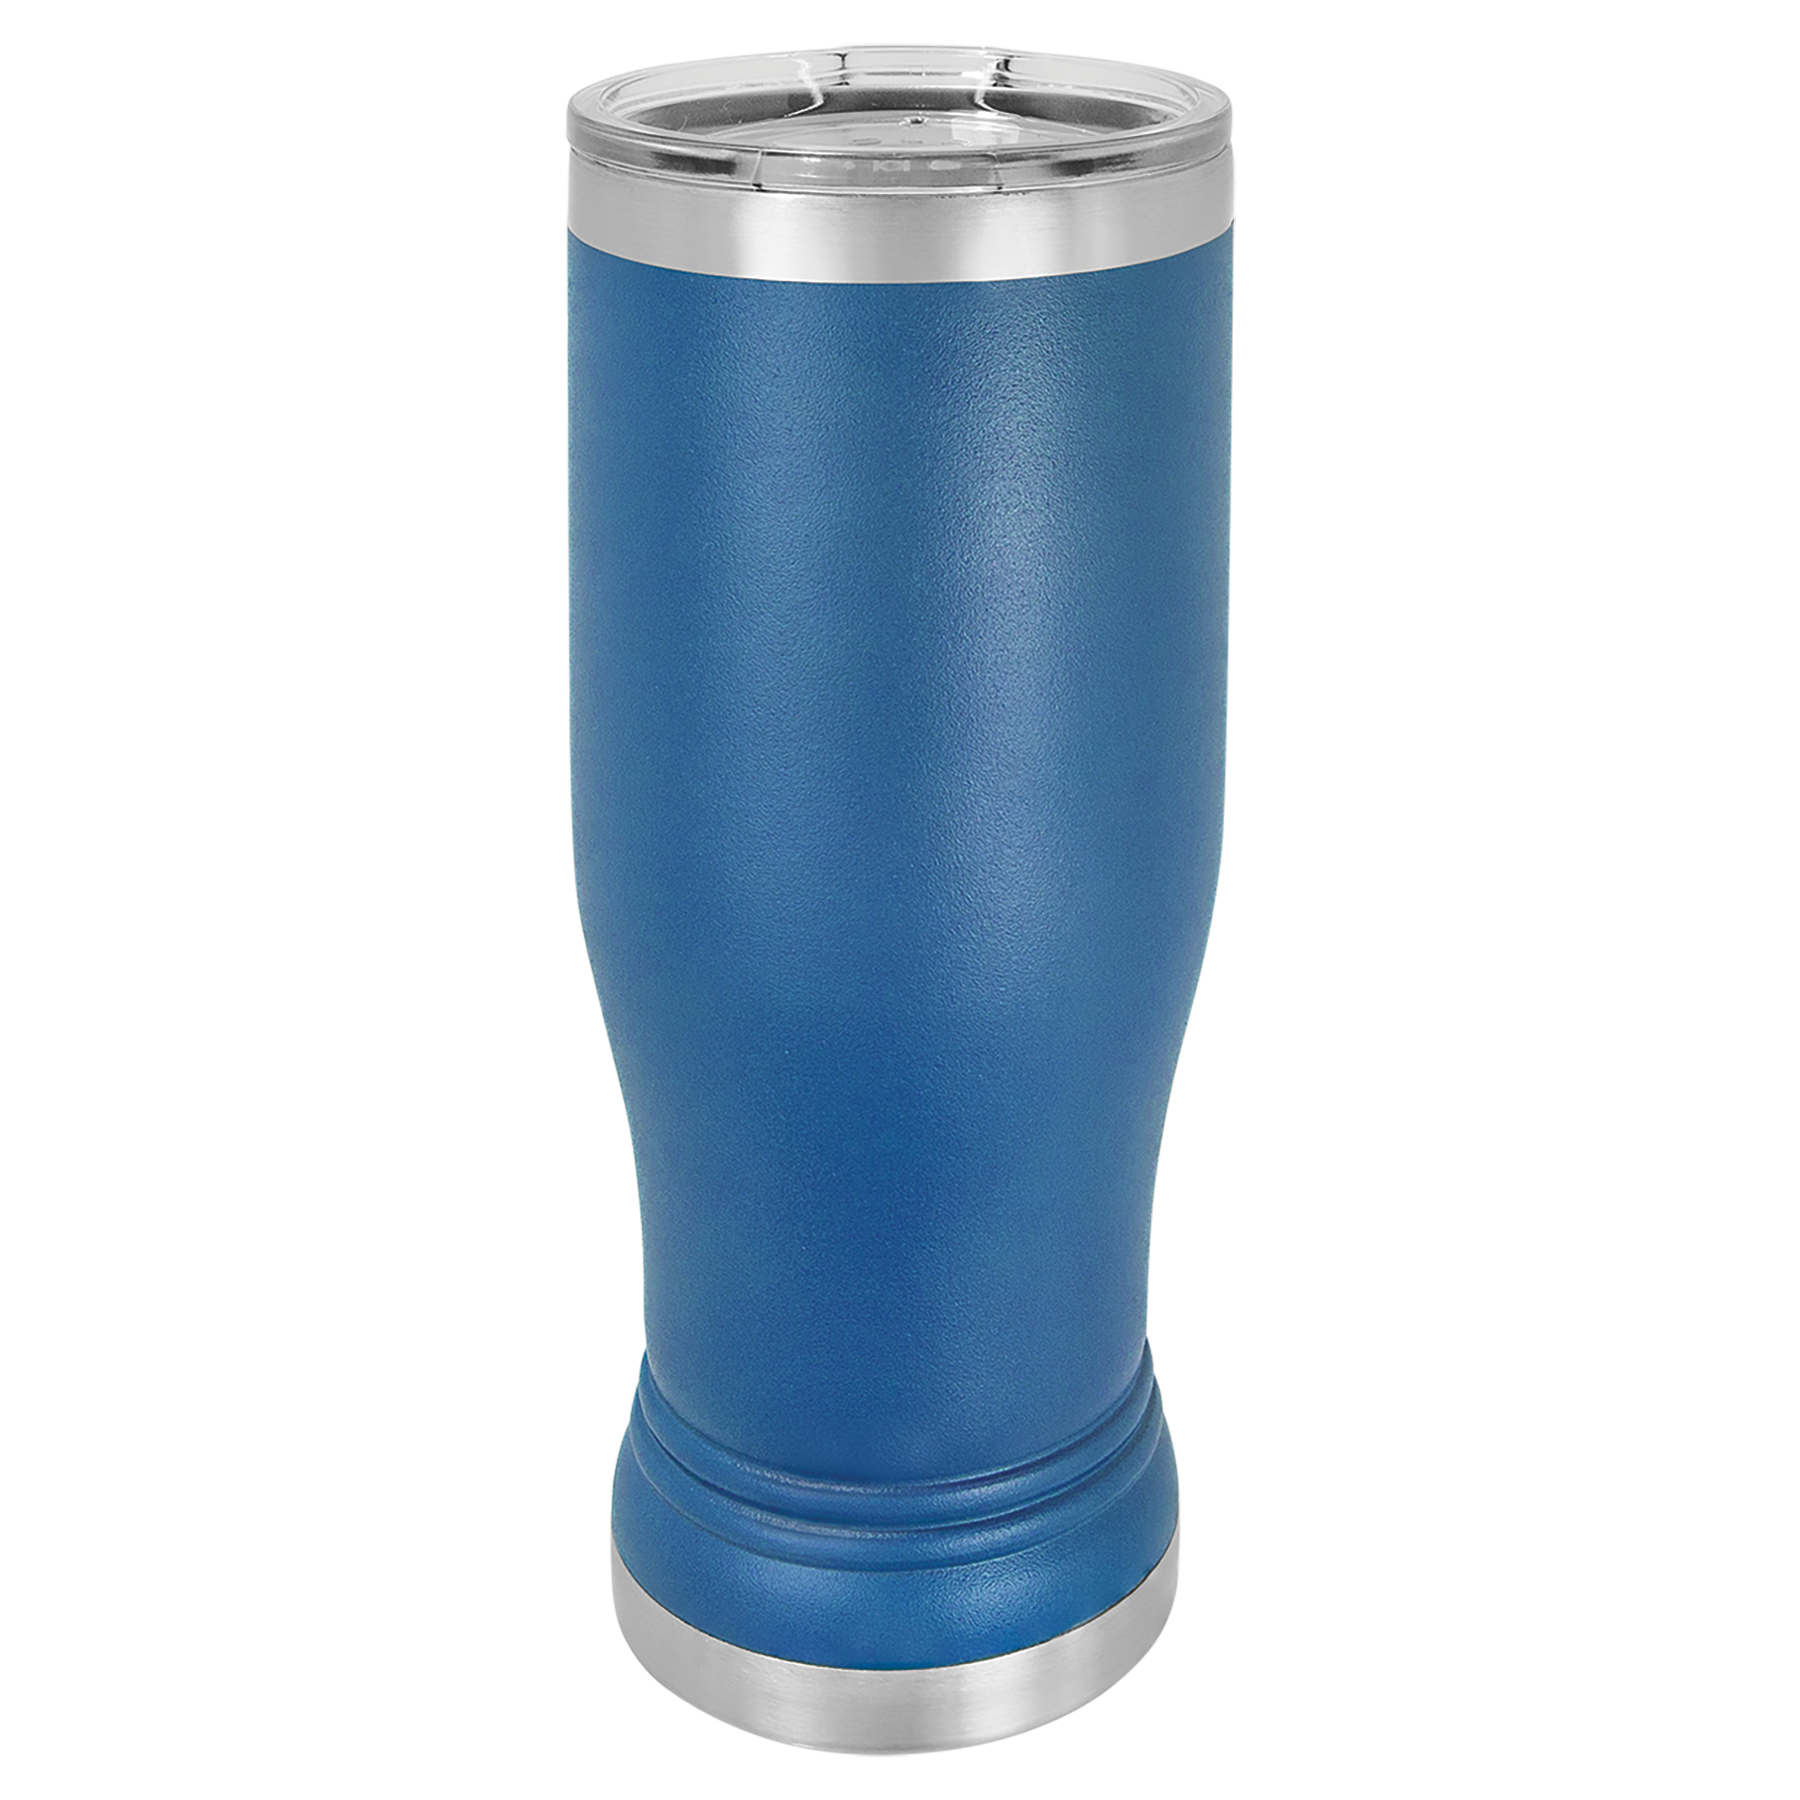 Royal Blue 14oz Pilsner Tumbler -One Free Engraving  -Fits most Cup Holders  -Double-wall Vacuum Insulated  -Made from 18/8 Gauge Stainless Steel (Type 304 Food Grade)  -Lid is BPA Free (Hand Wash Only)  -Not recommended for Dishwasher  -Works with Cold and Hot Drinks  -17 Color Options  -Perfect for Personalized Gifts, Awards, Incentives, Swag & Fundraisers